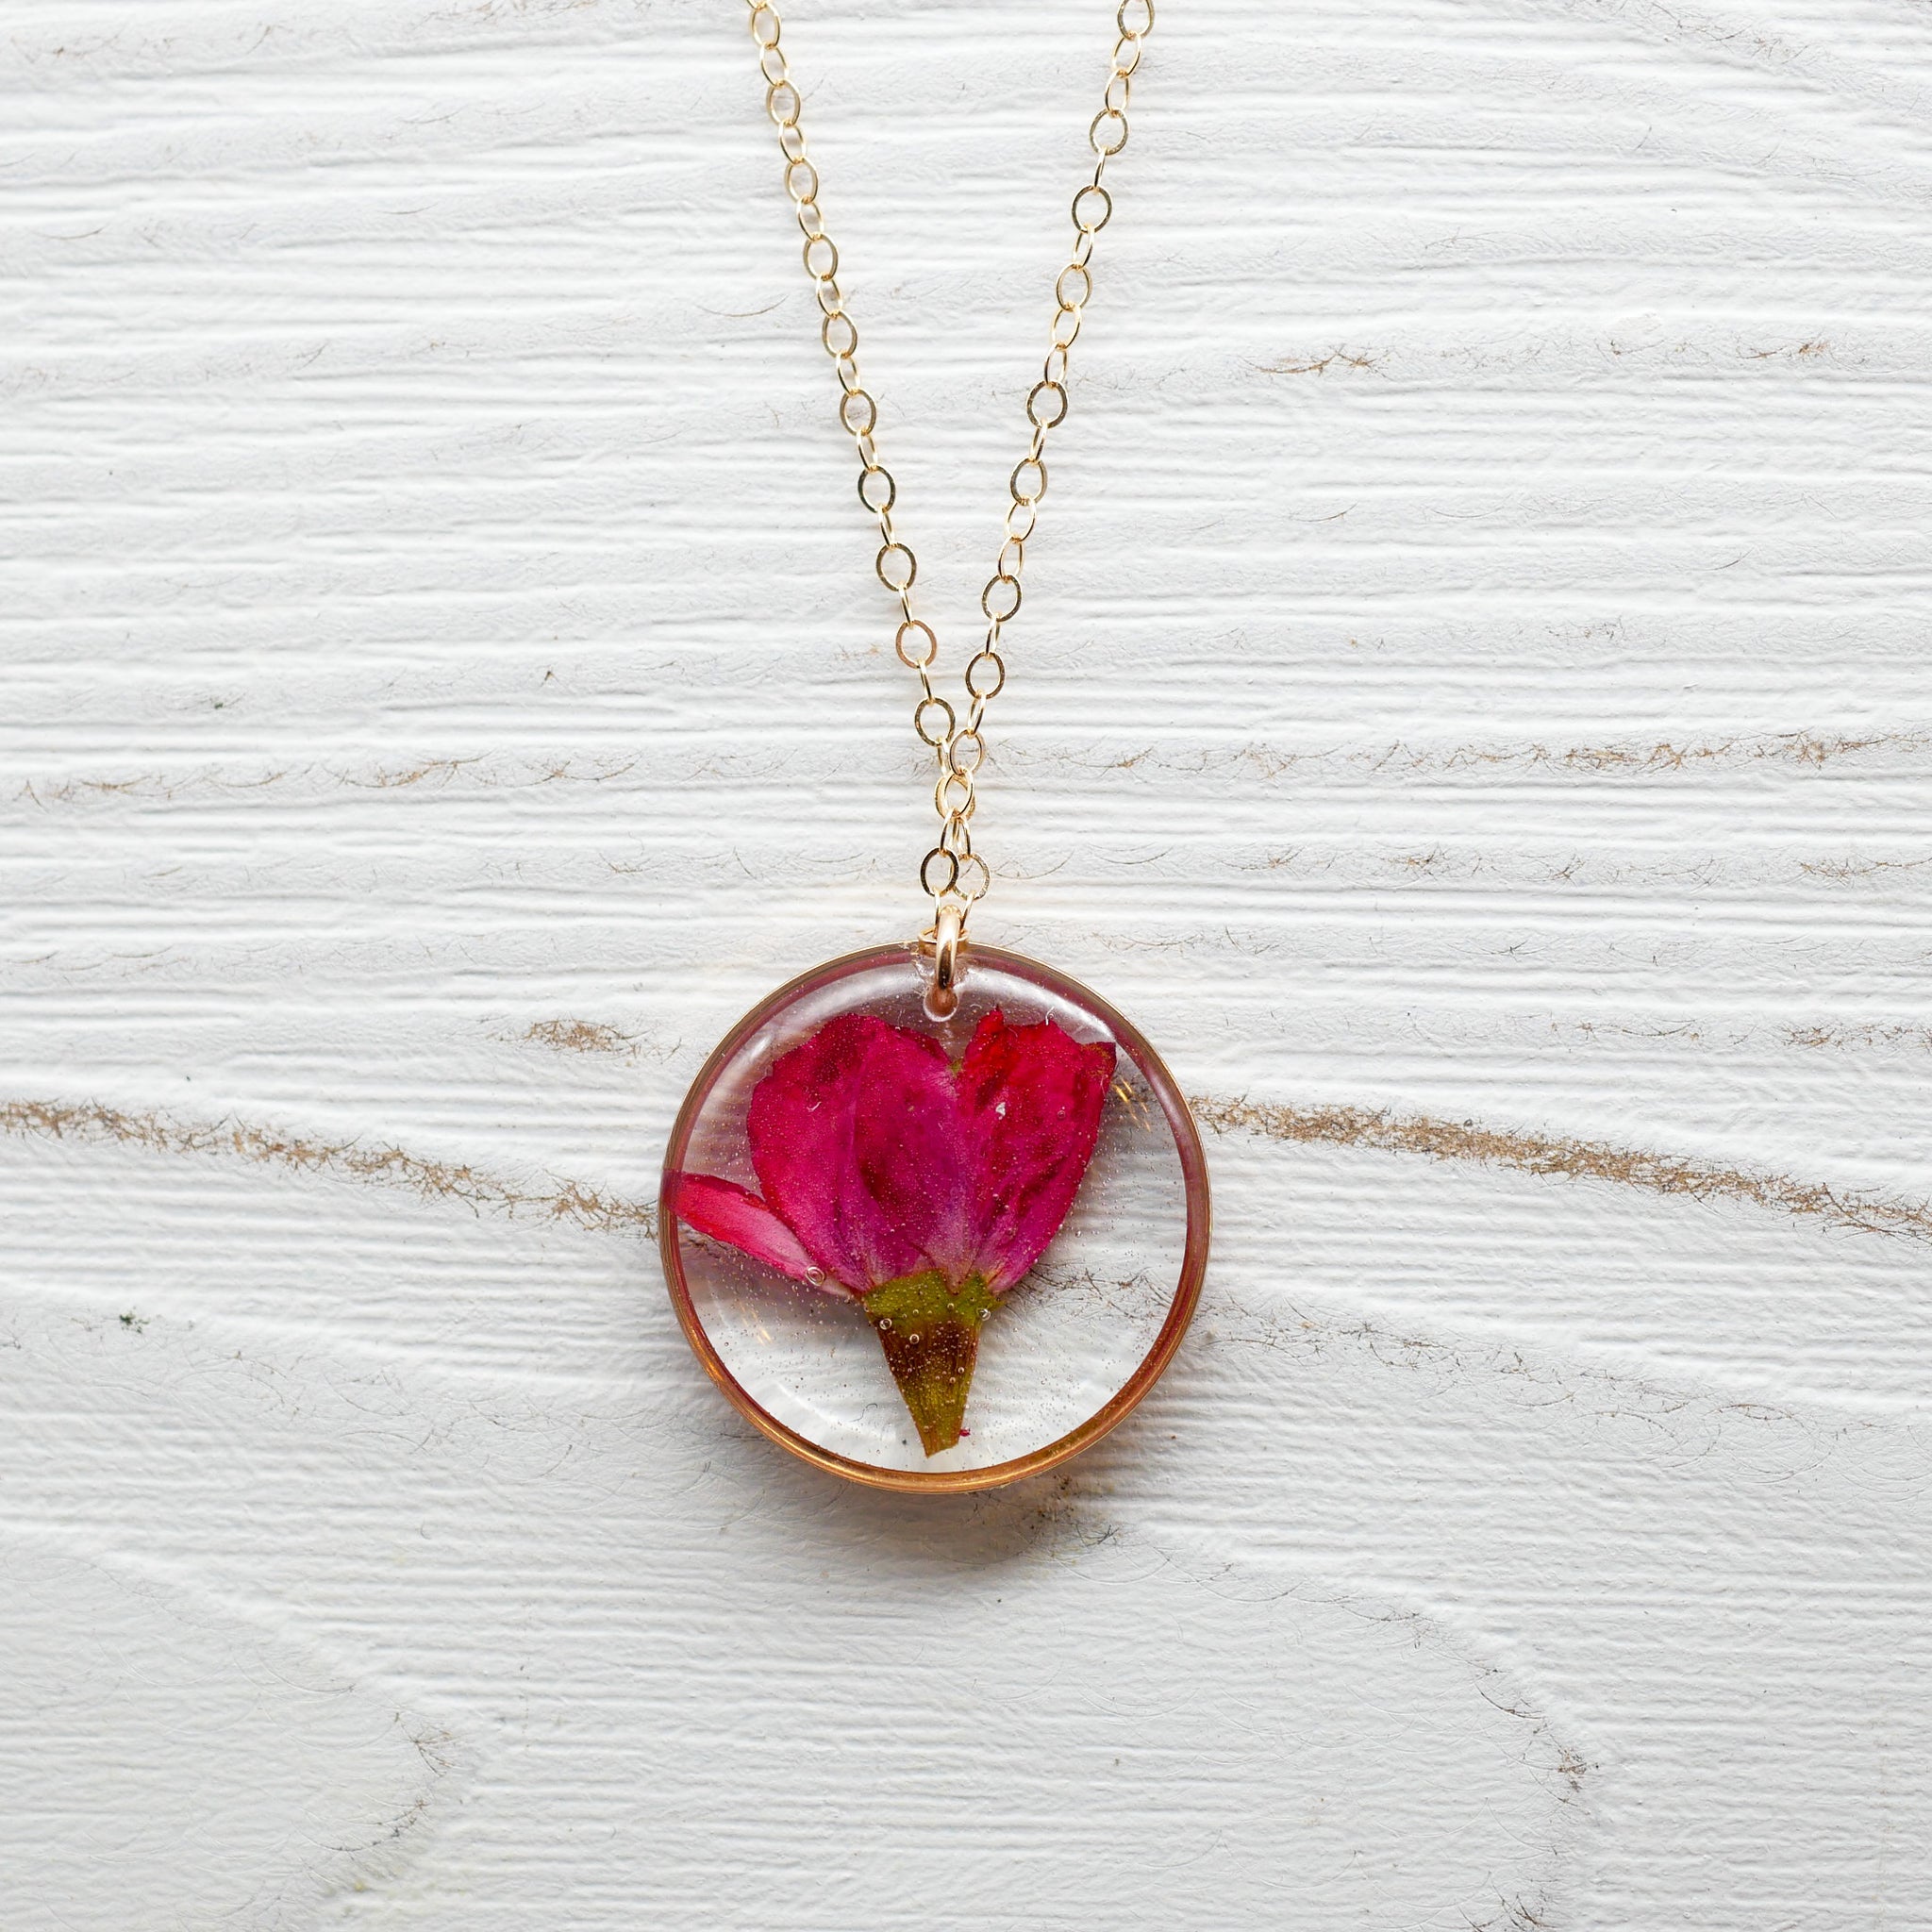 Dainty Rose Charm Necklace